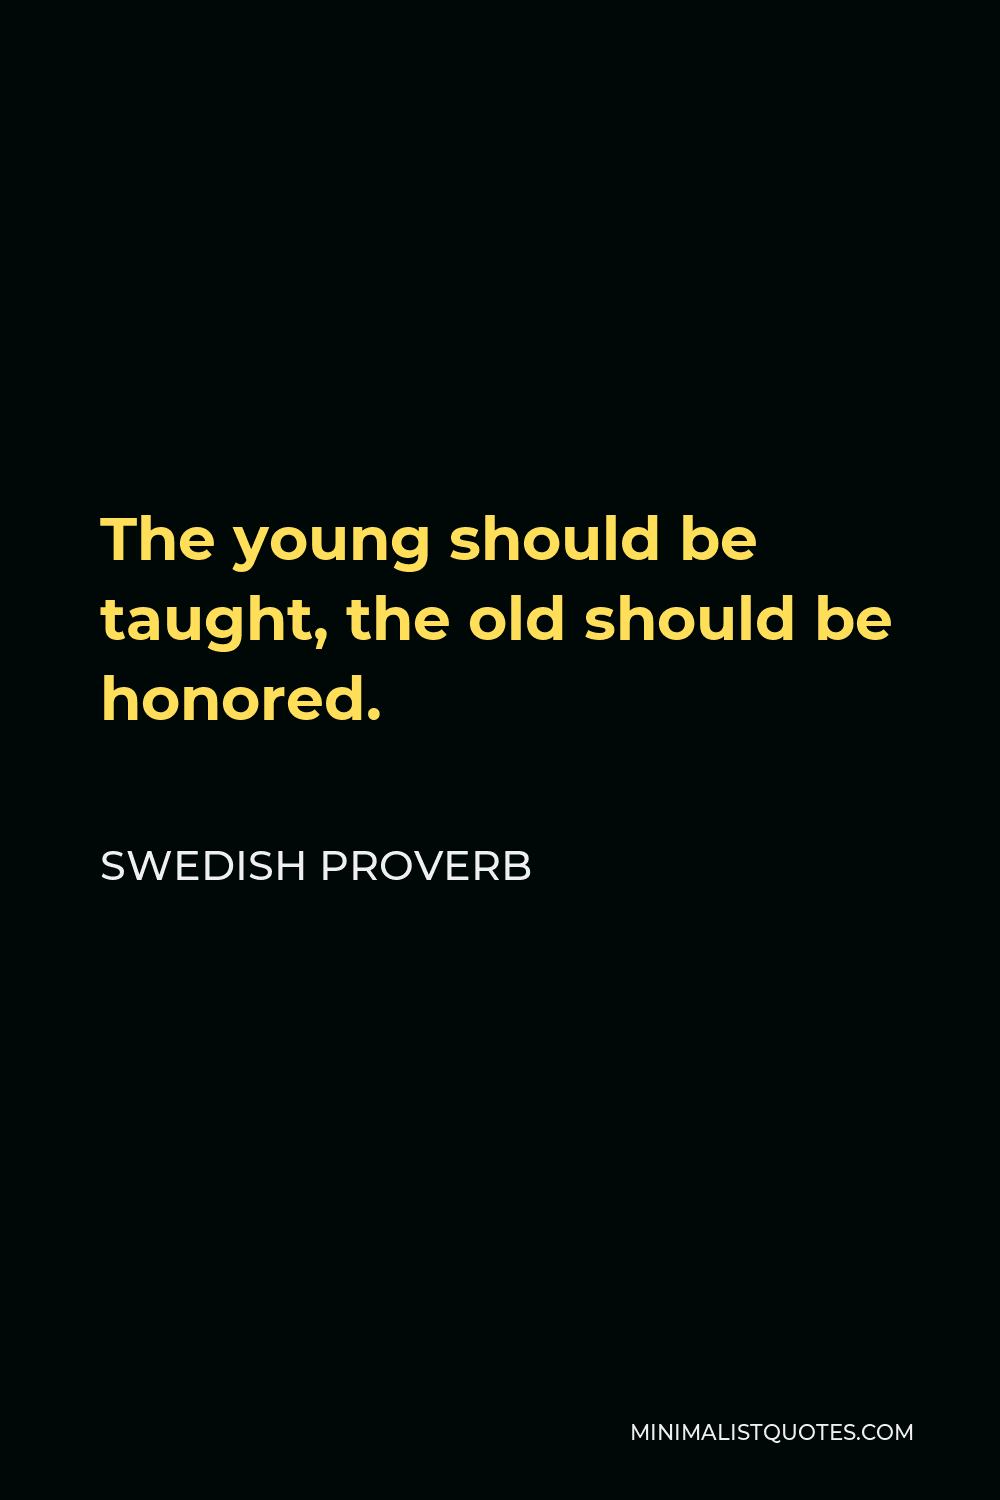 Swedish Proverb Quote - The young should be taught, the old should be honored.